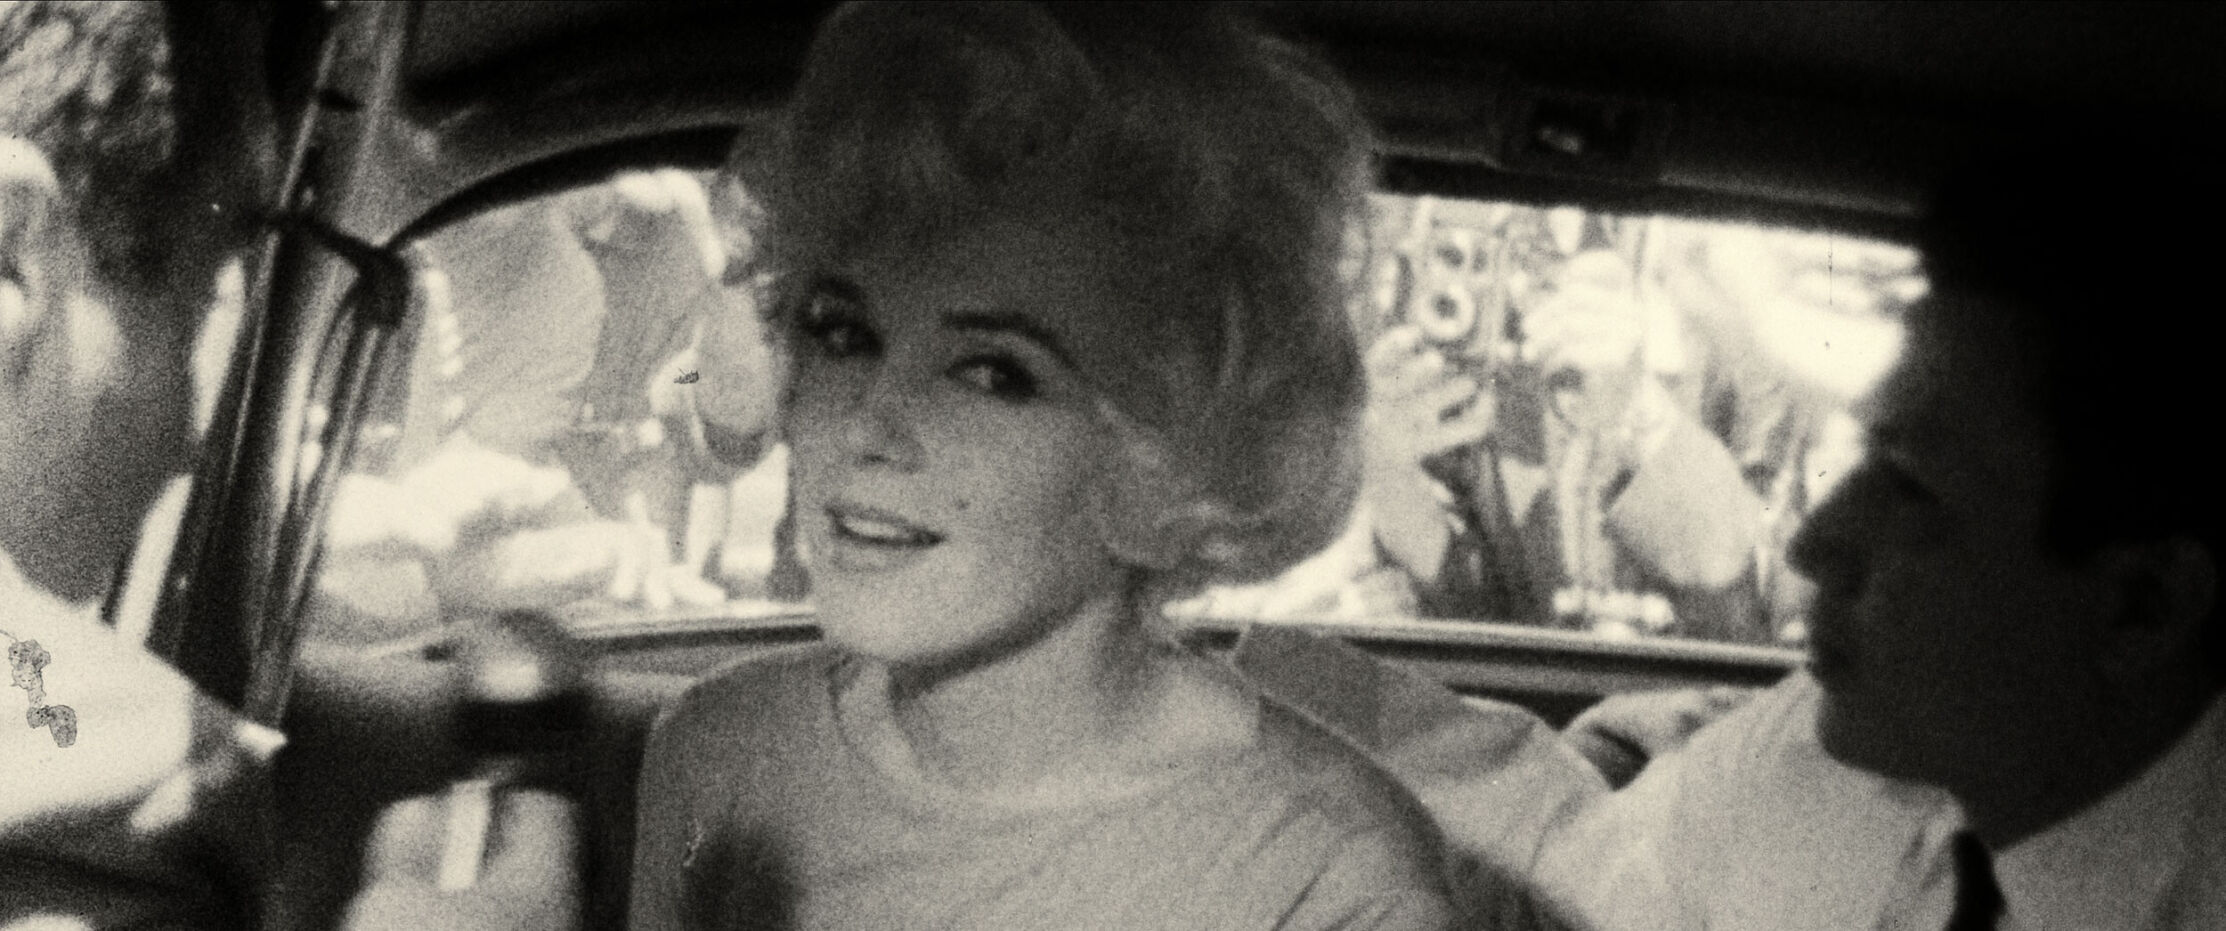 The Mystery of Marilyn Monroe' revisits her life and death 60 years later  through unheard tapes, National